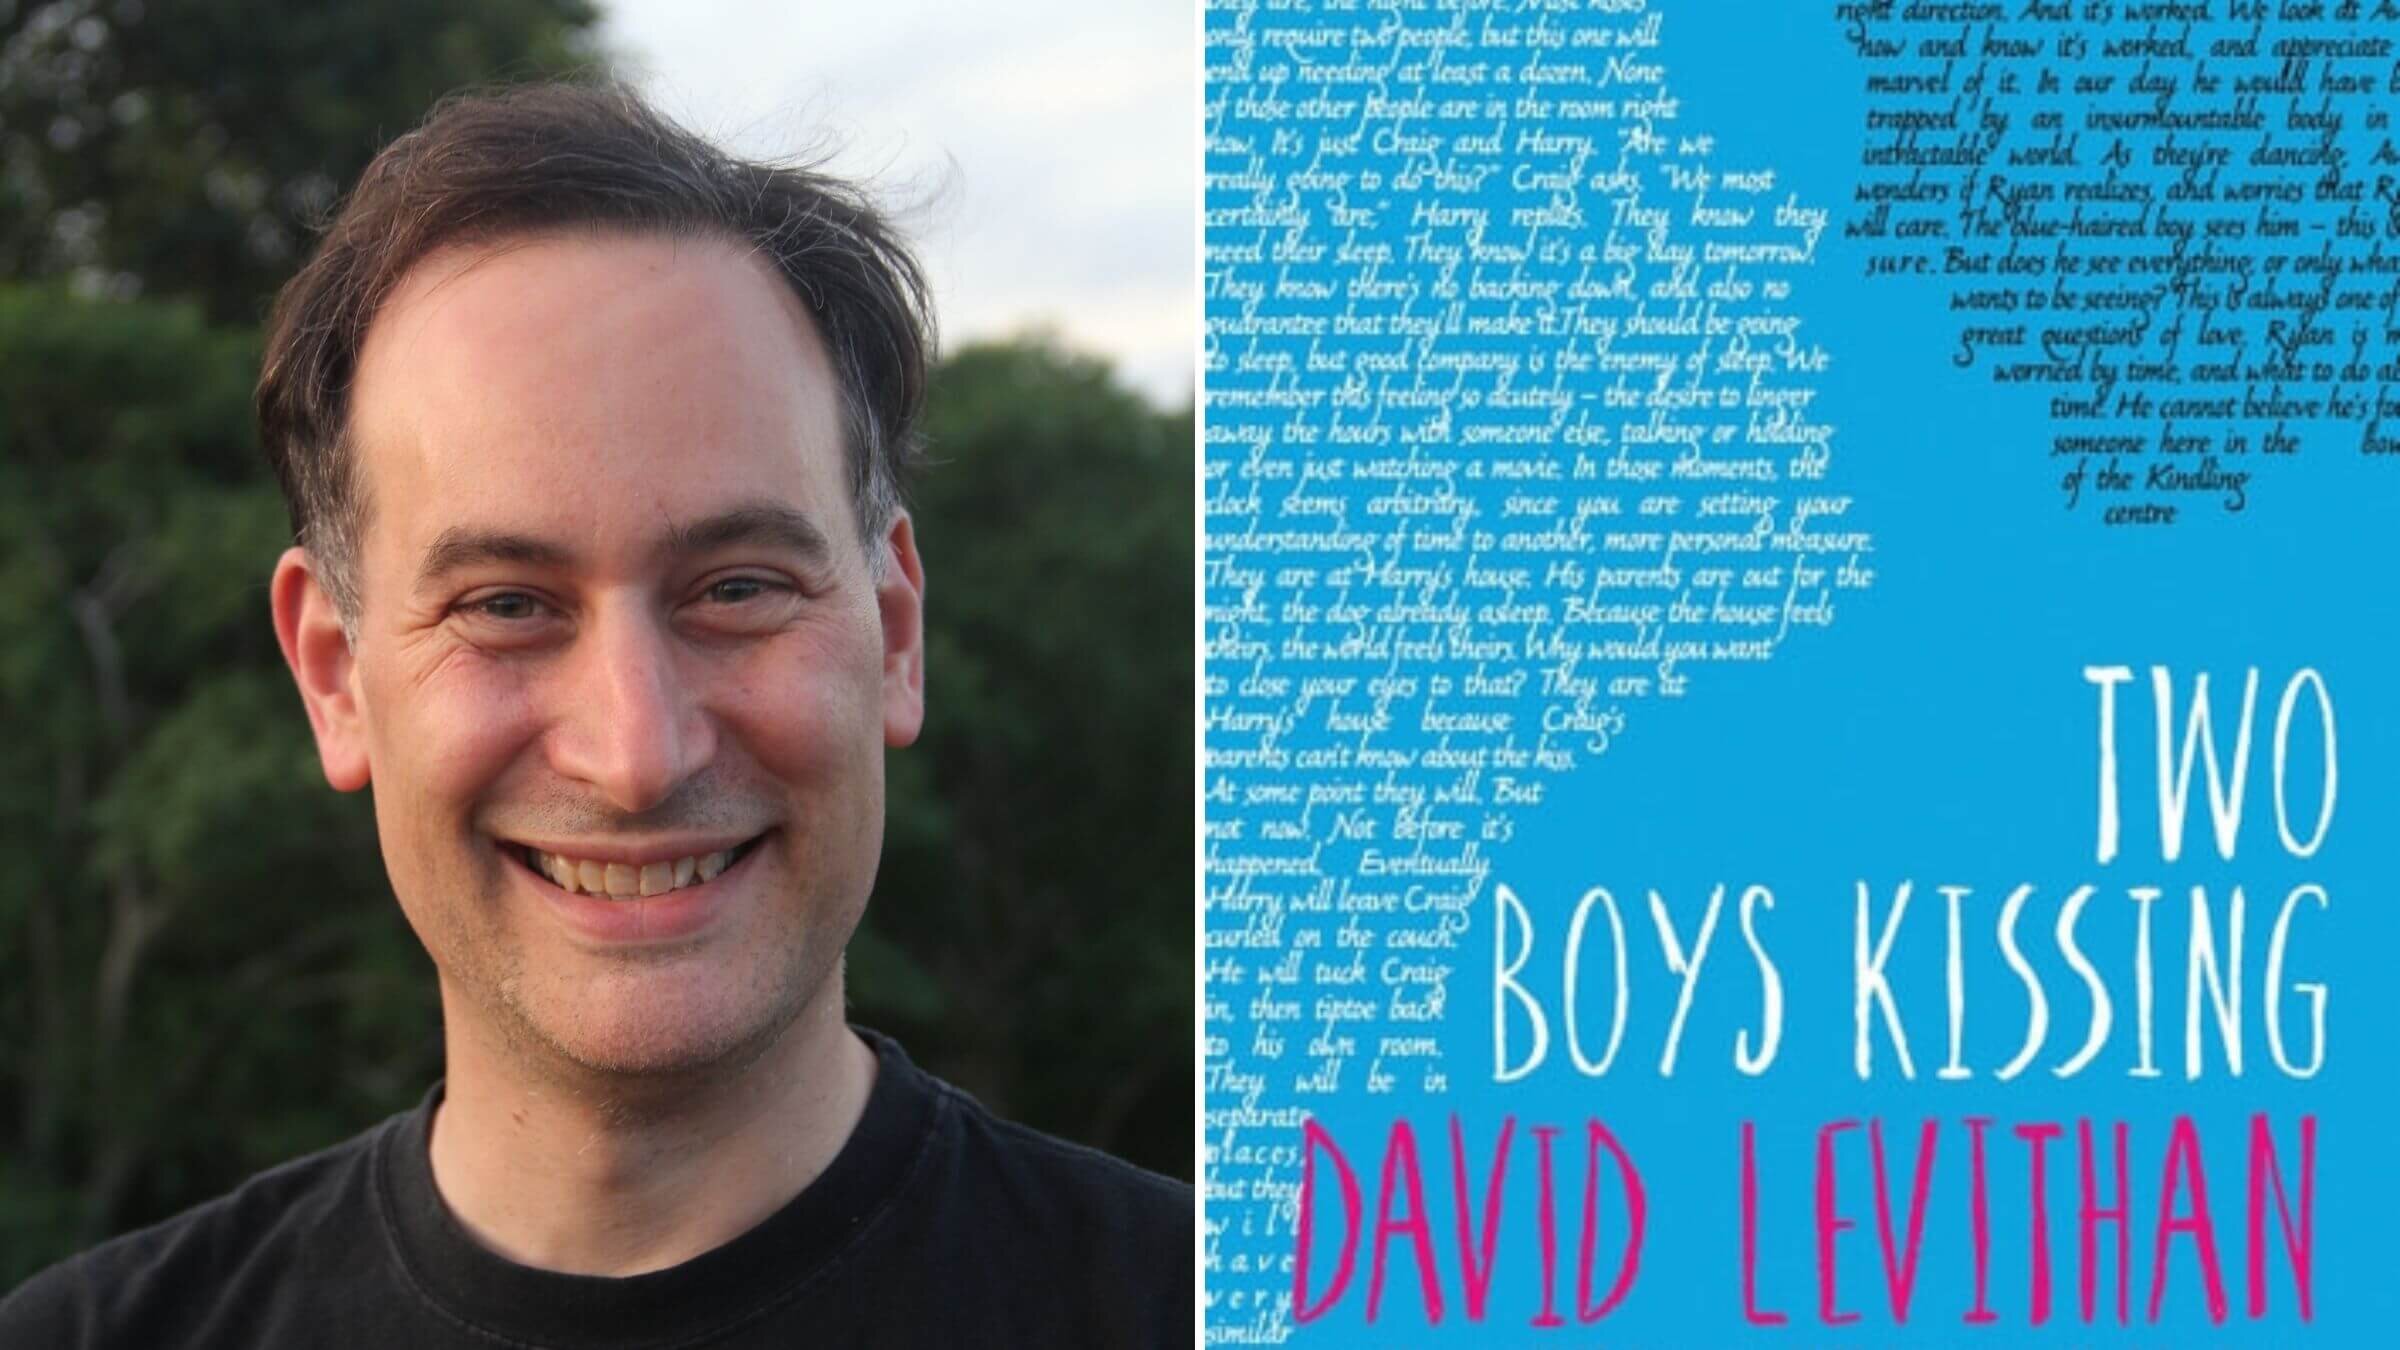 Author David Levithan has seen his books banned many times. The current surge of censorship in libraries and schools, he says, is different. 